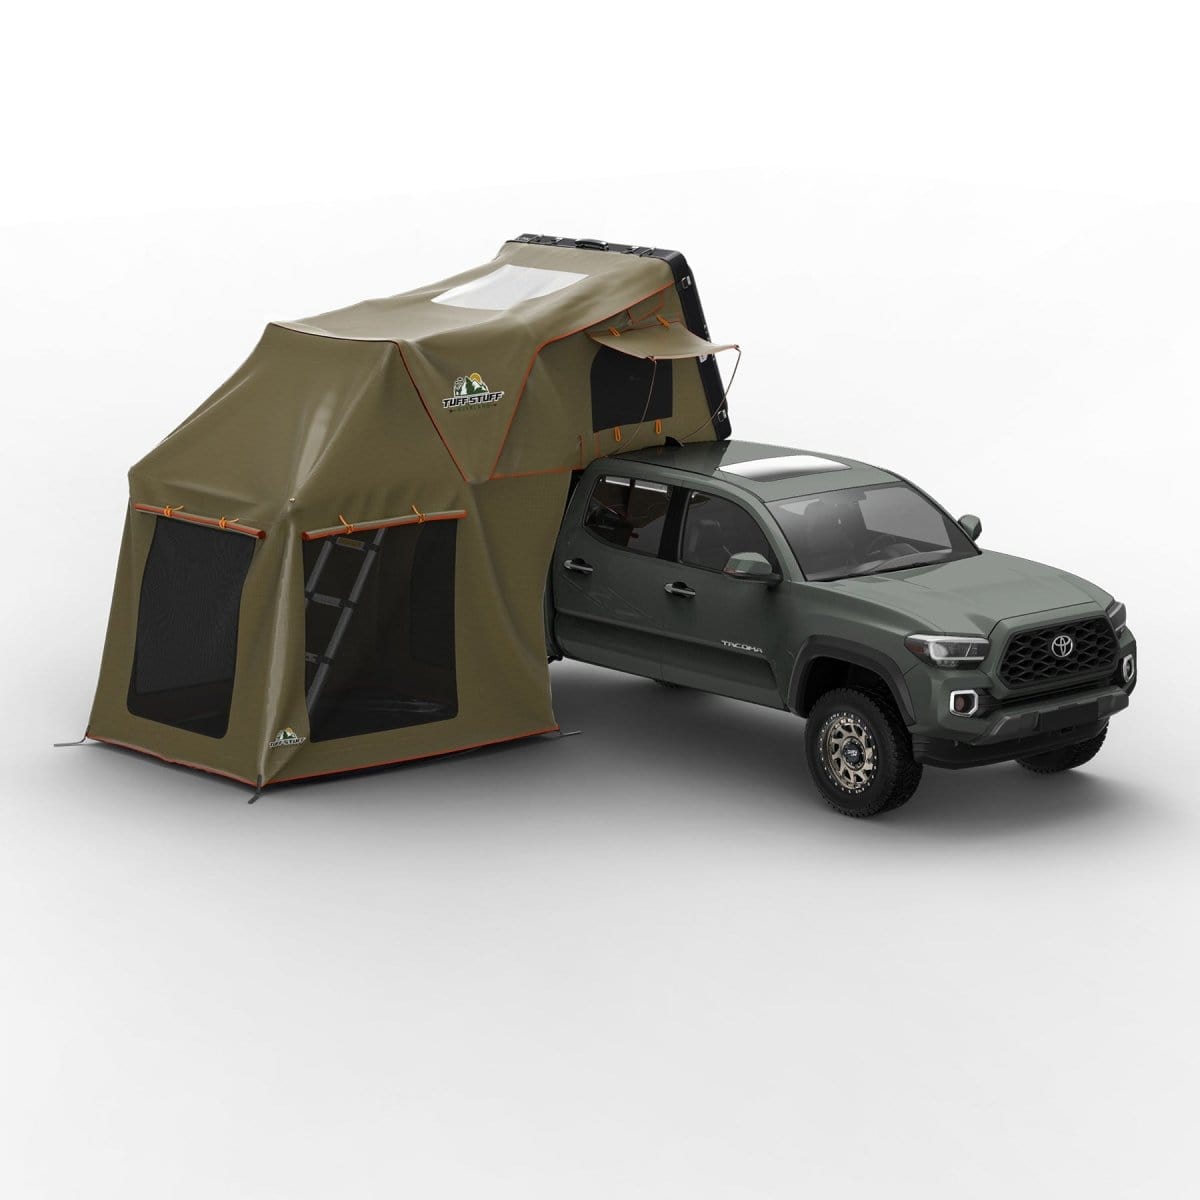 Tuff Stuff Overland Roof Top Tent With Annex Stealth Hardshell Rooftop Tent from Tuff Stuff Overland